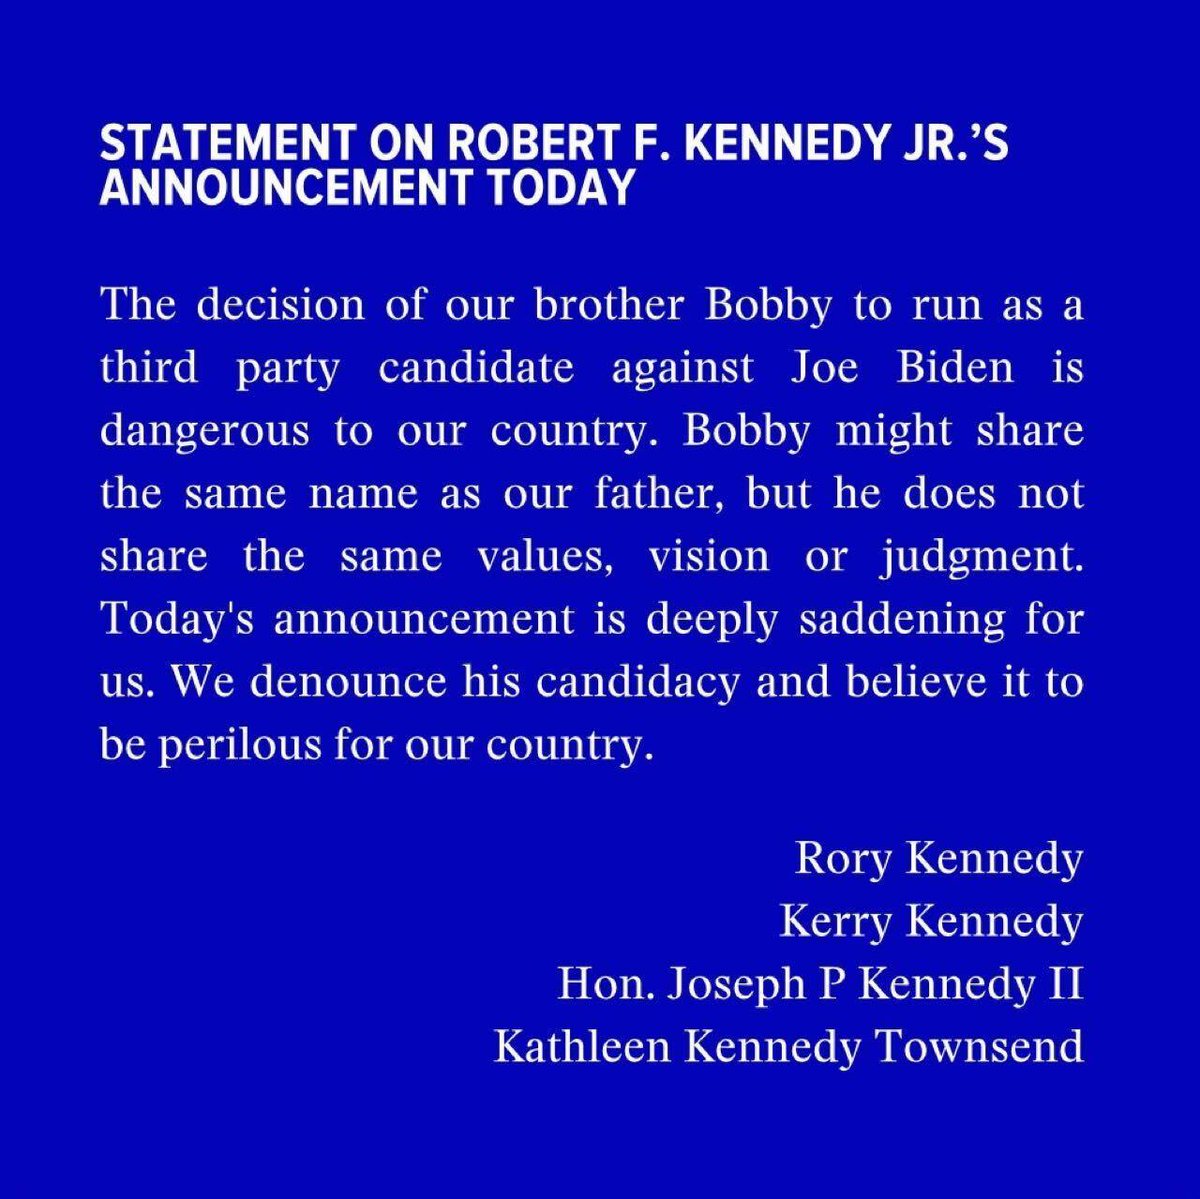 Good on the Kennedy family to put out this statement. It couldn’t have been easy.